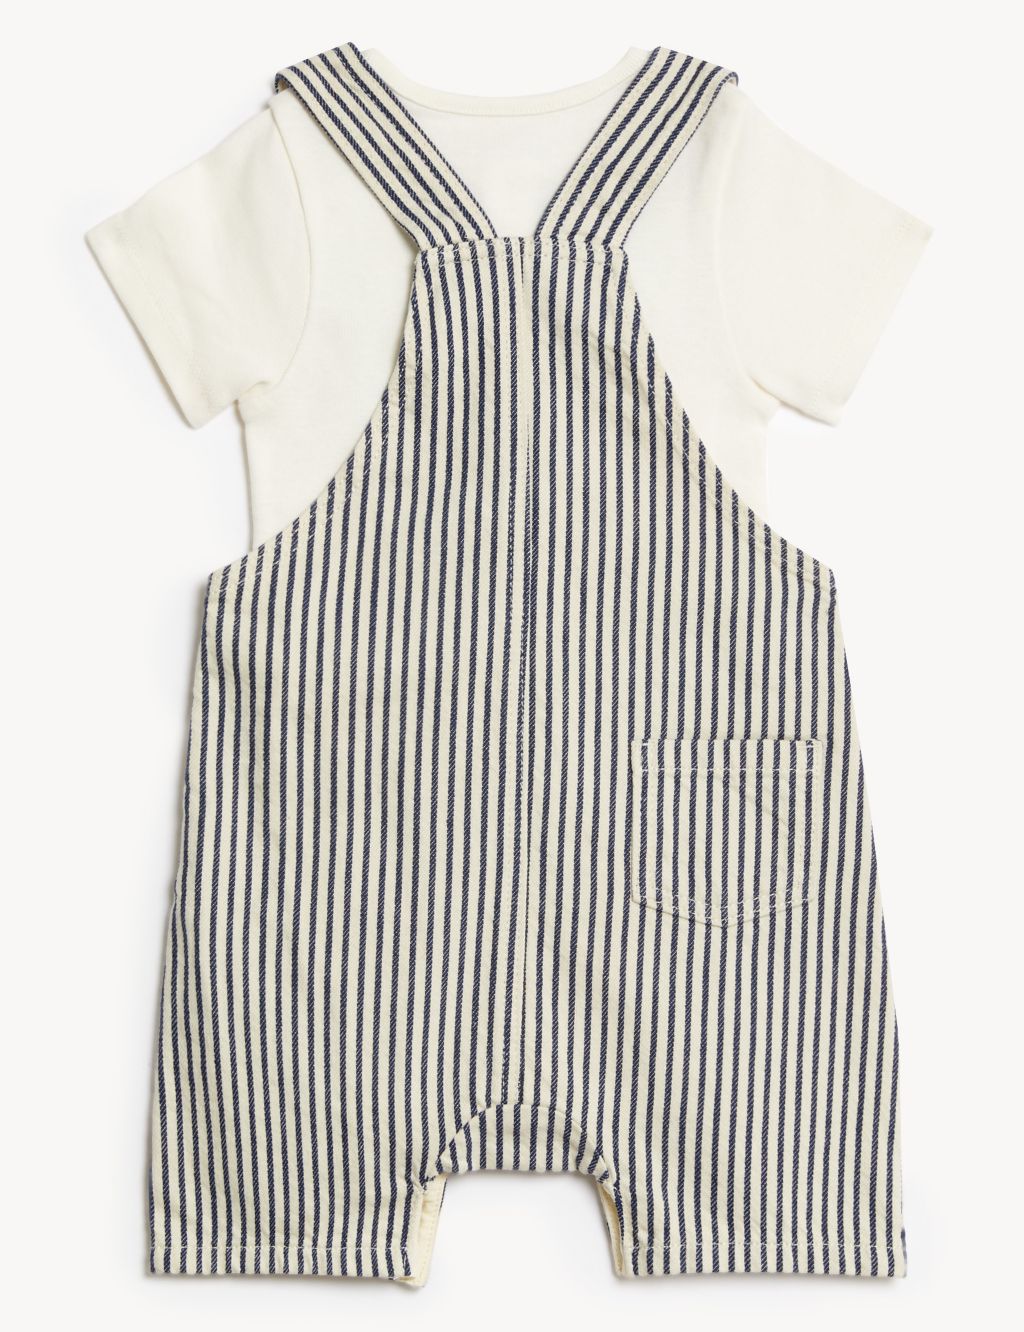 2pc Pure Cotton Striped Outfit (0-3 Yrs) image 2